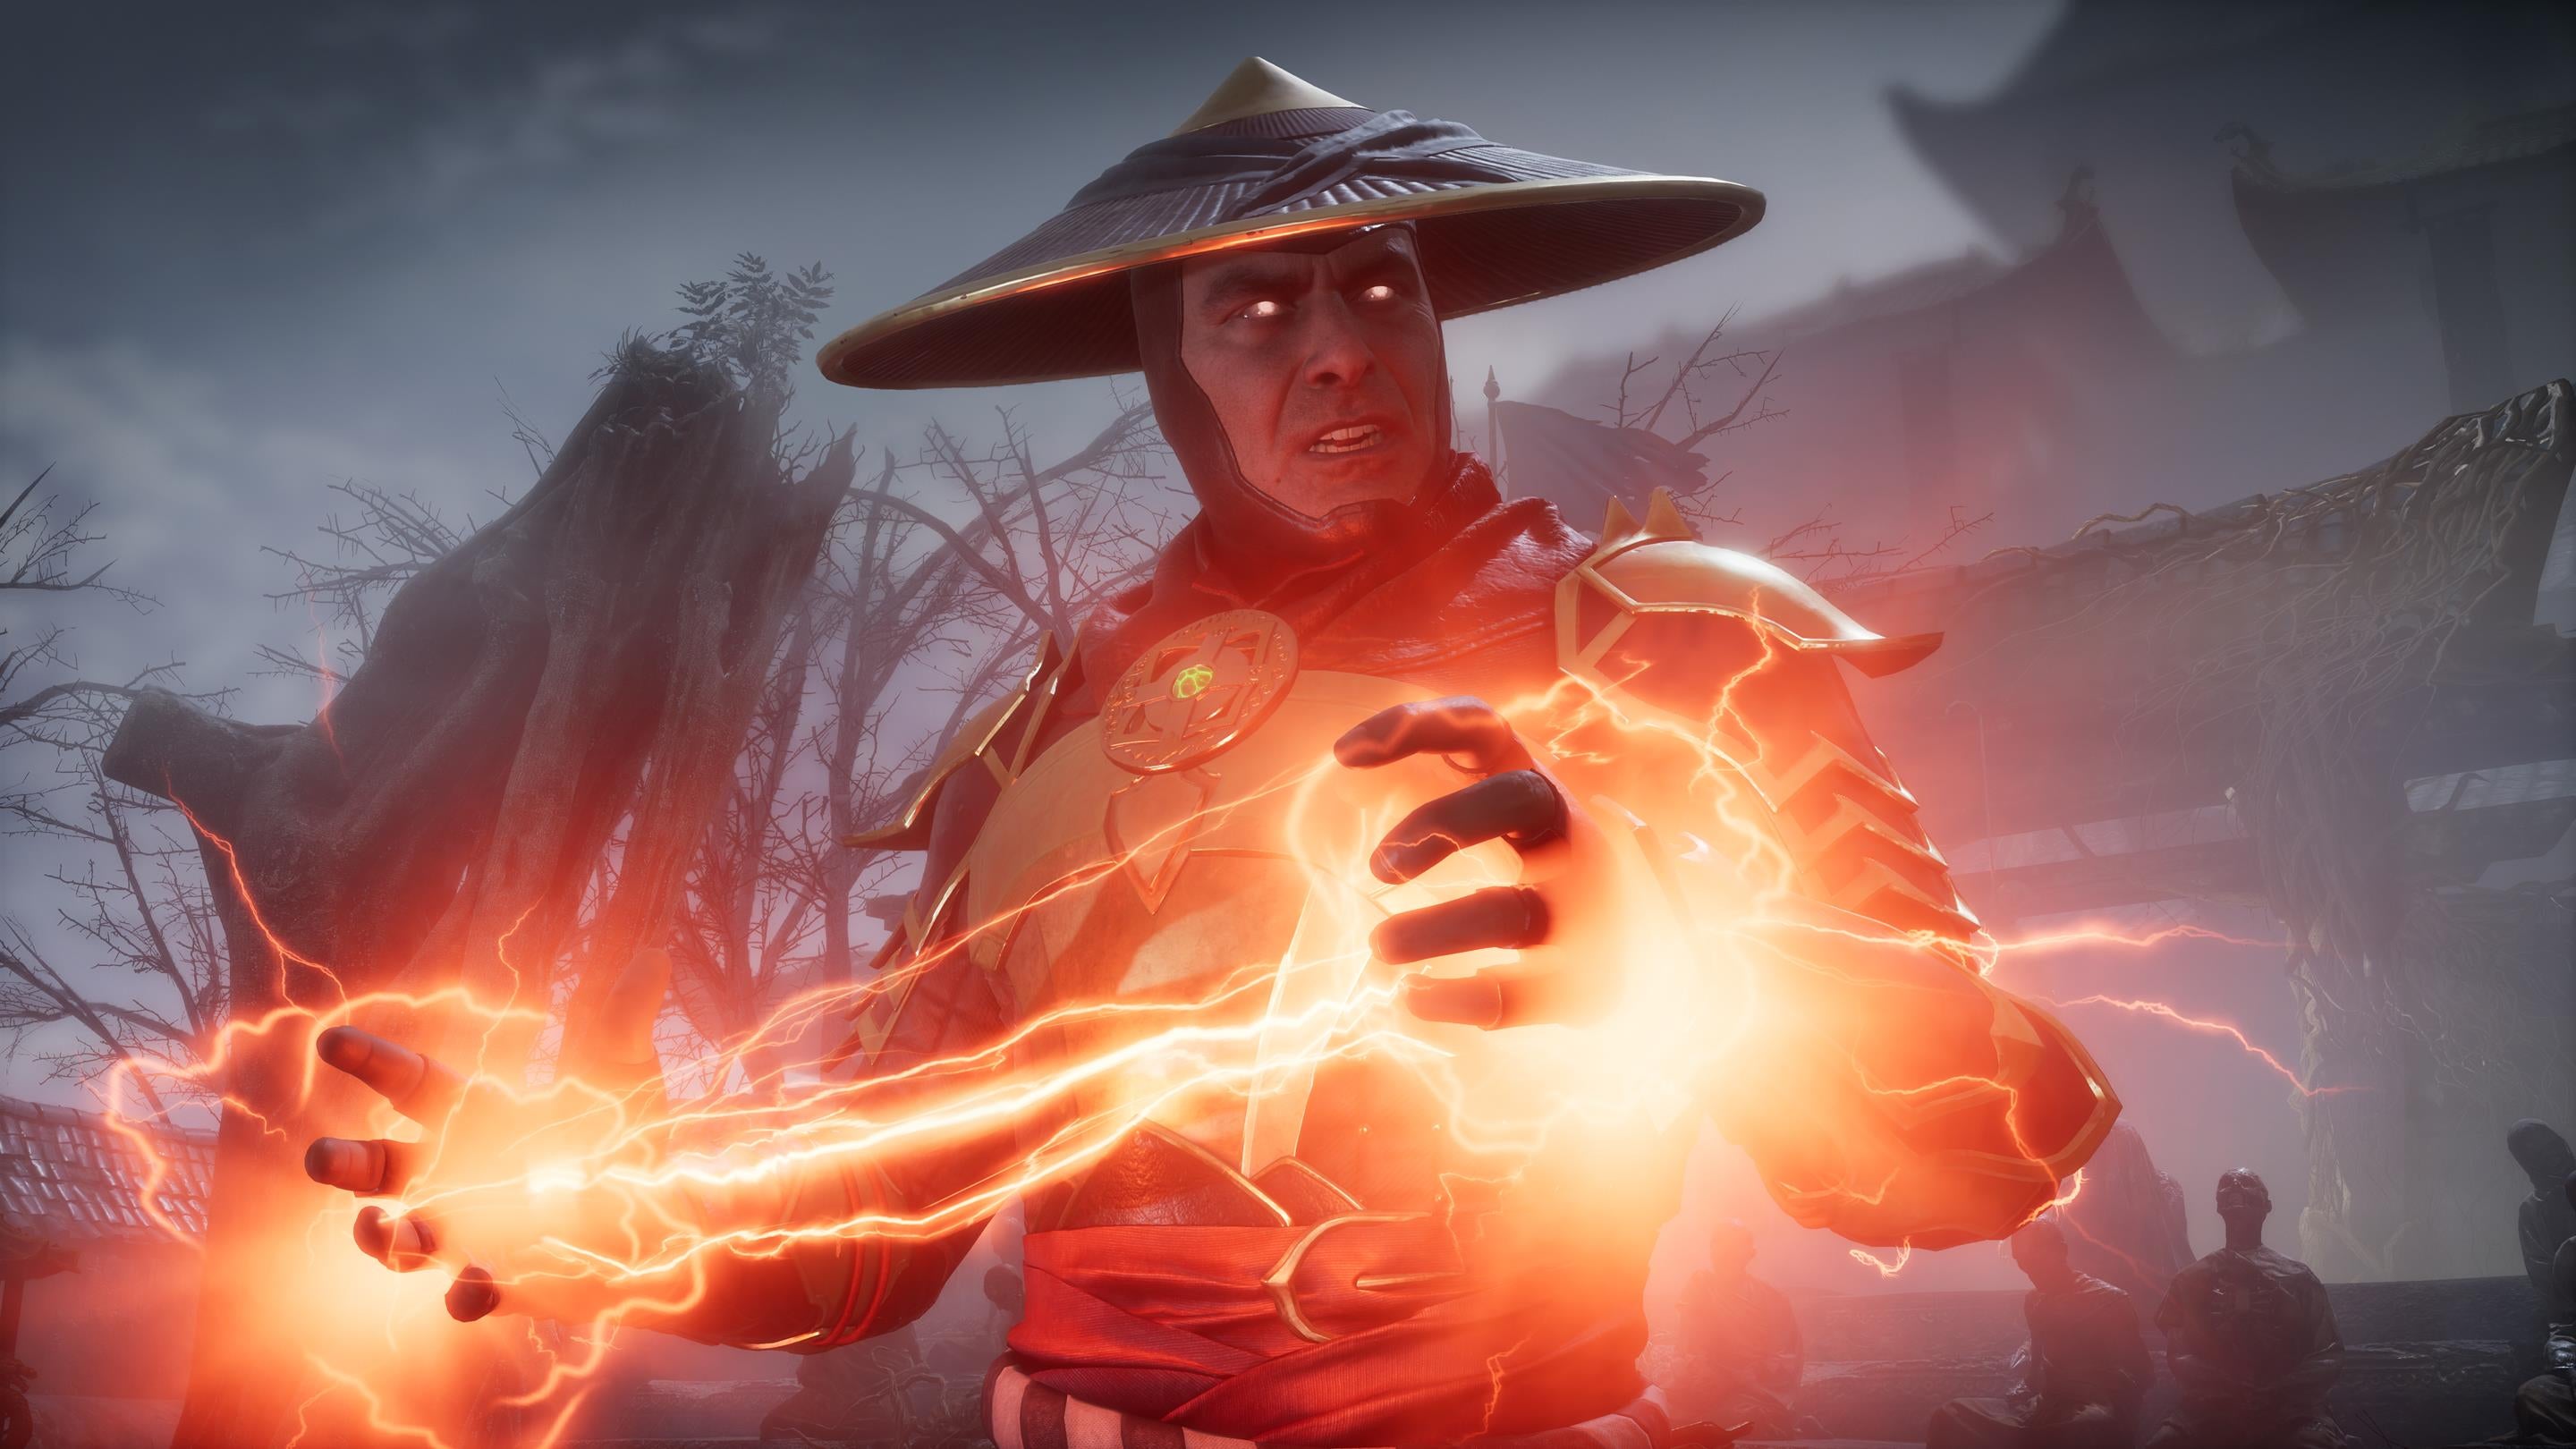 Mortal Kombat 12 announced for 2023 during – of all things – a call to investors